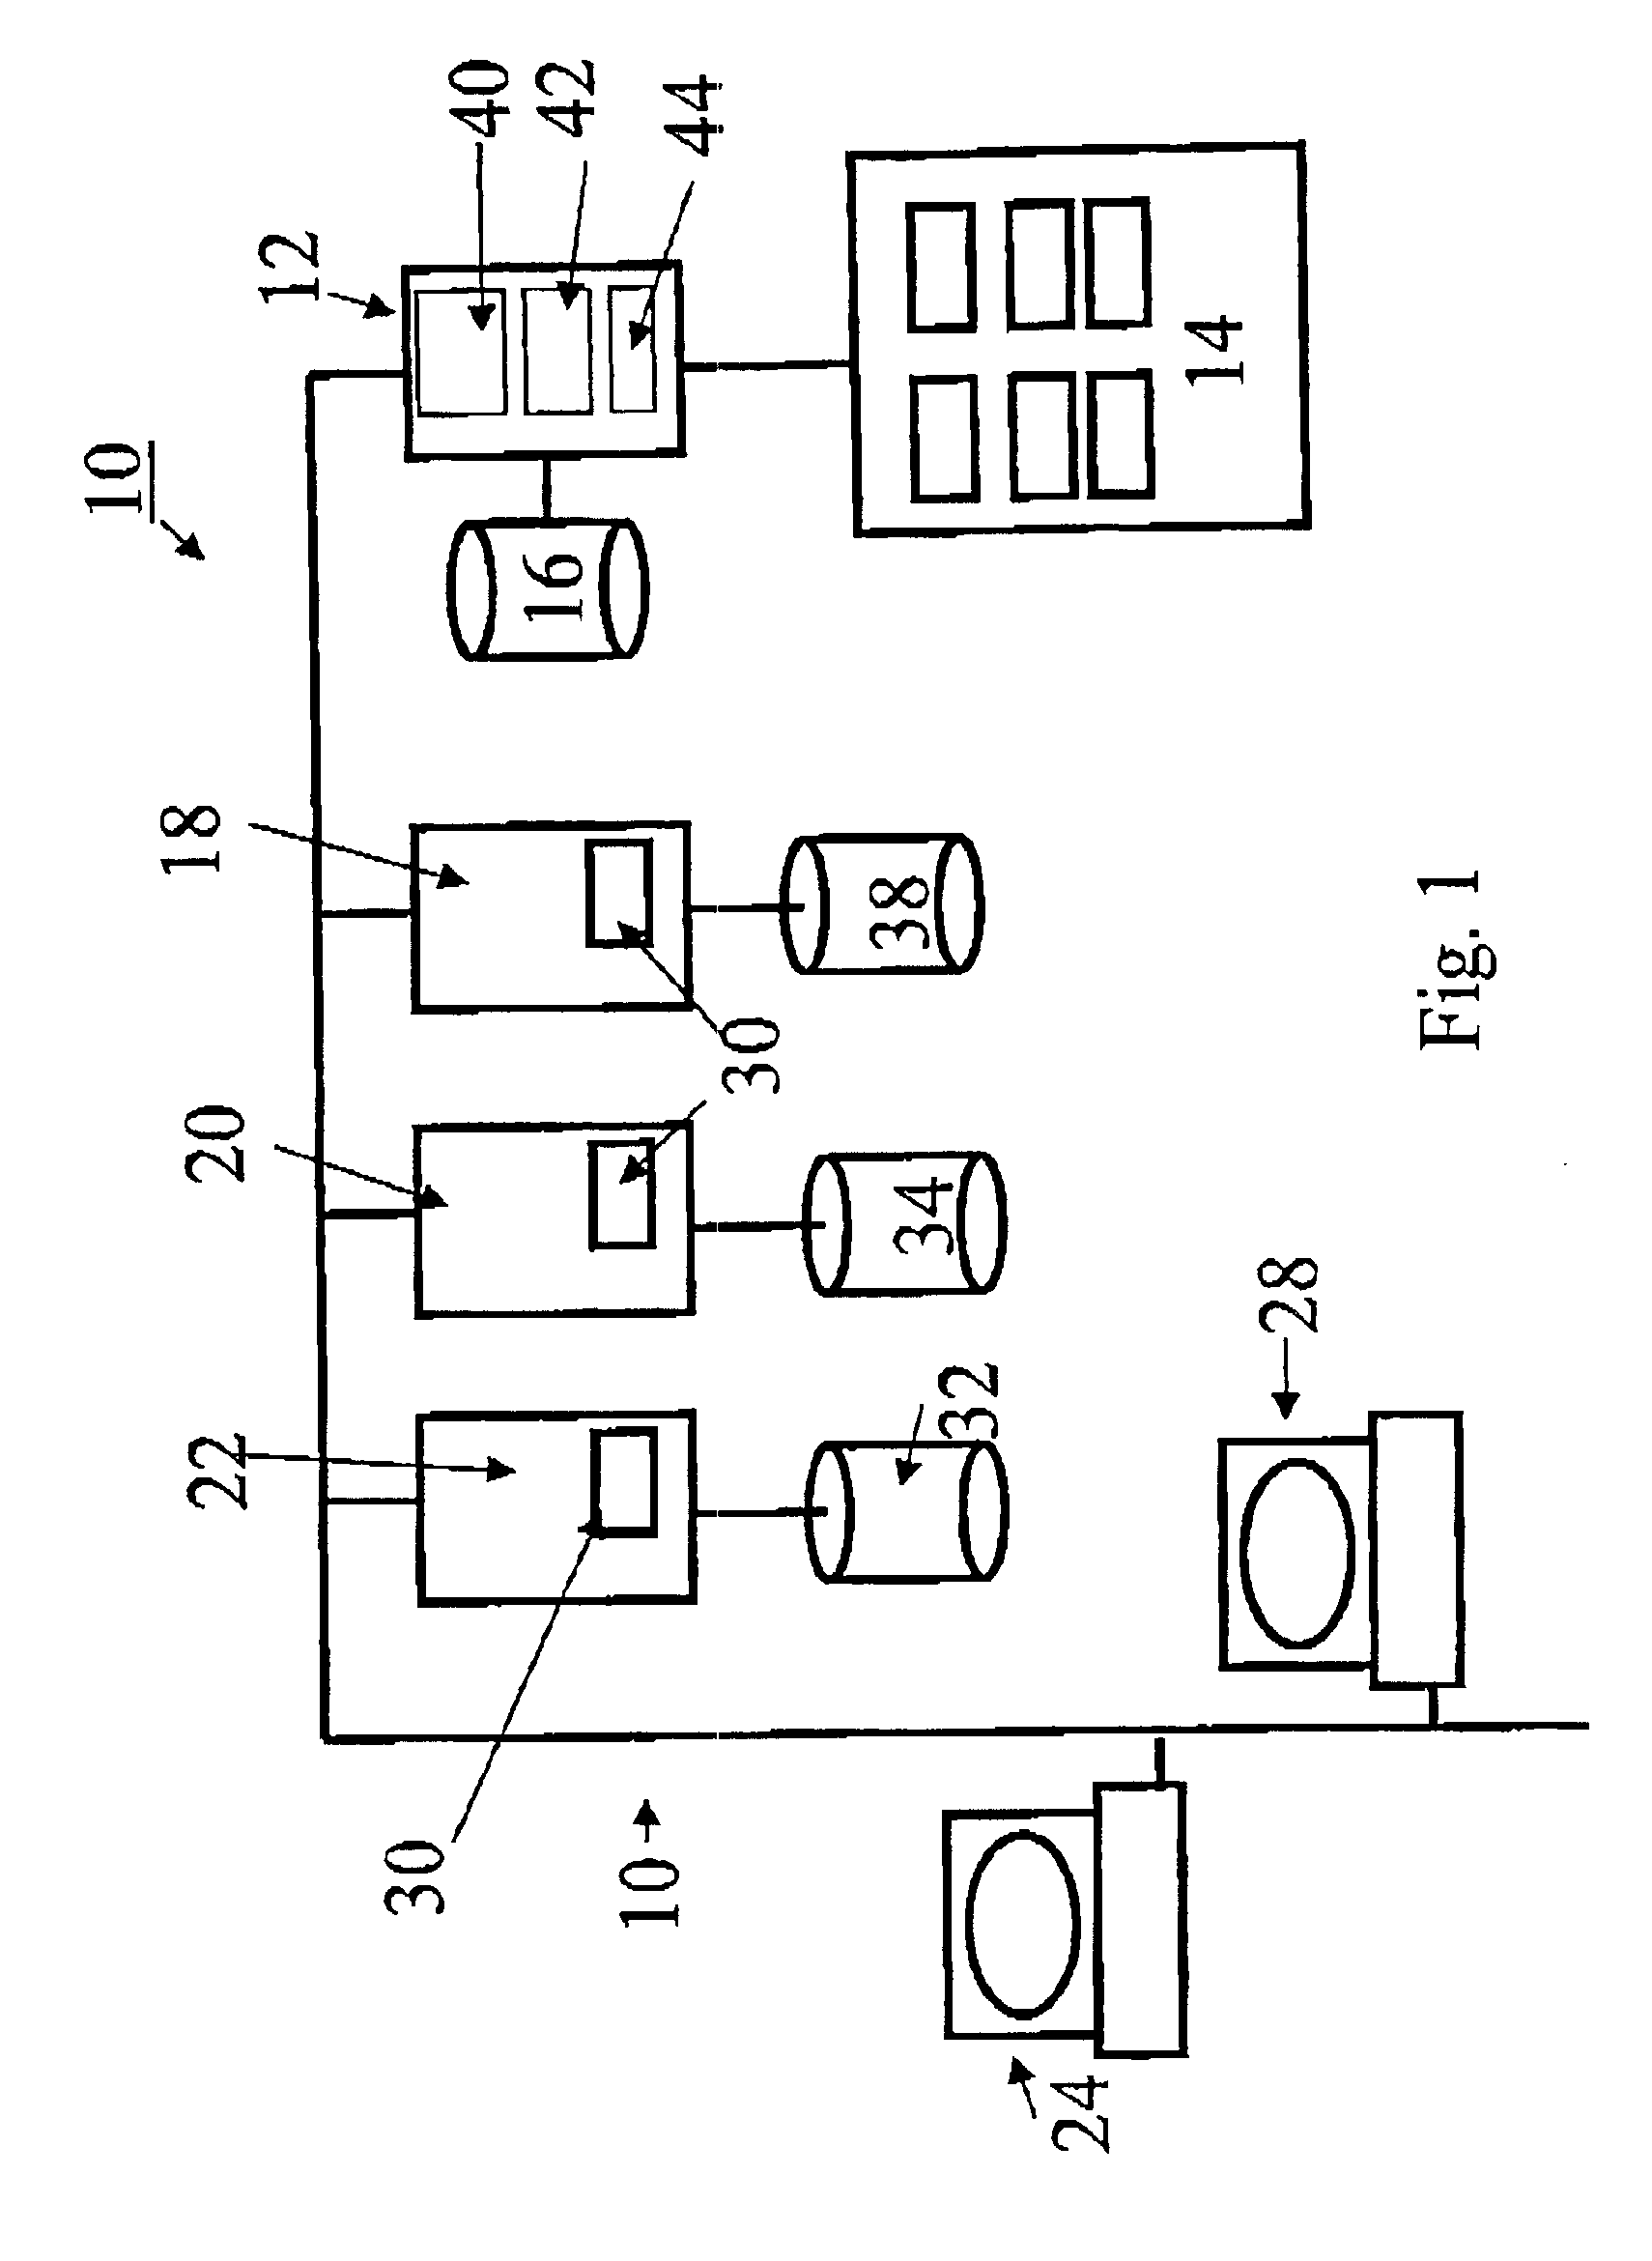 Systems and methods for backing up data files